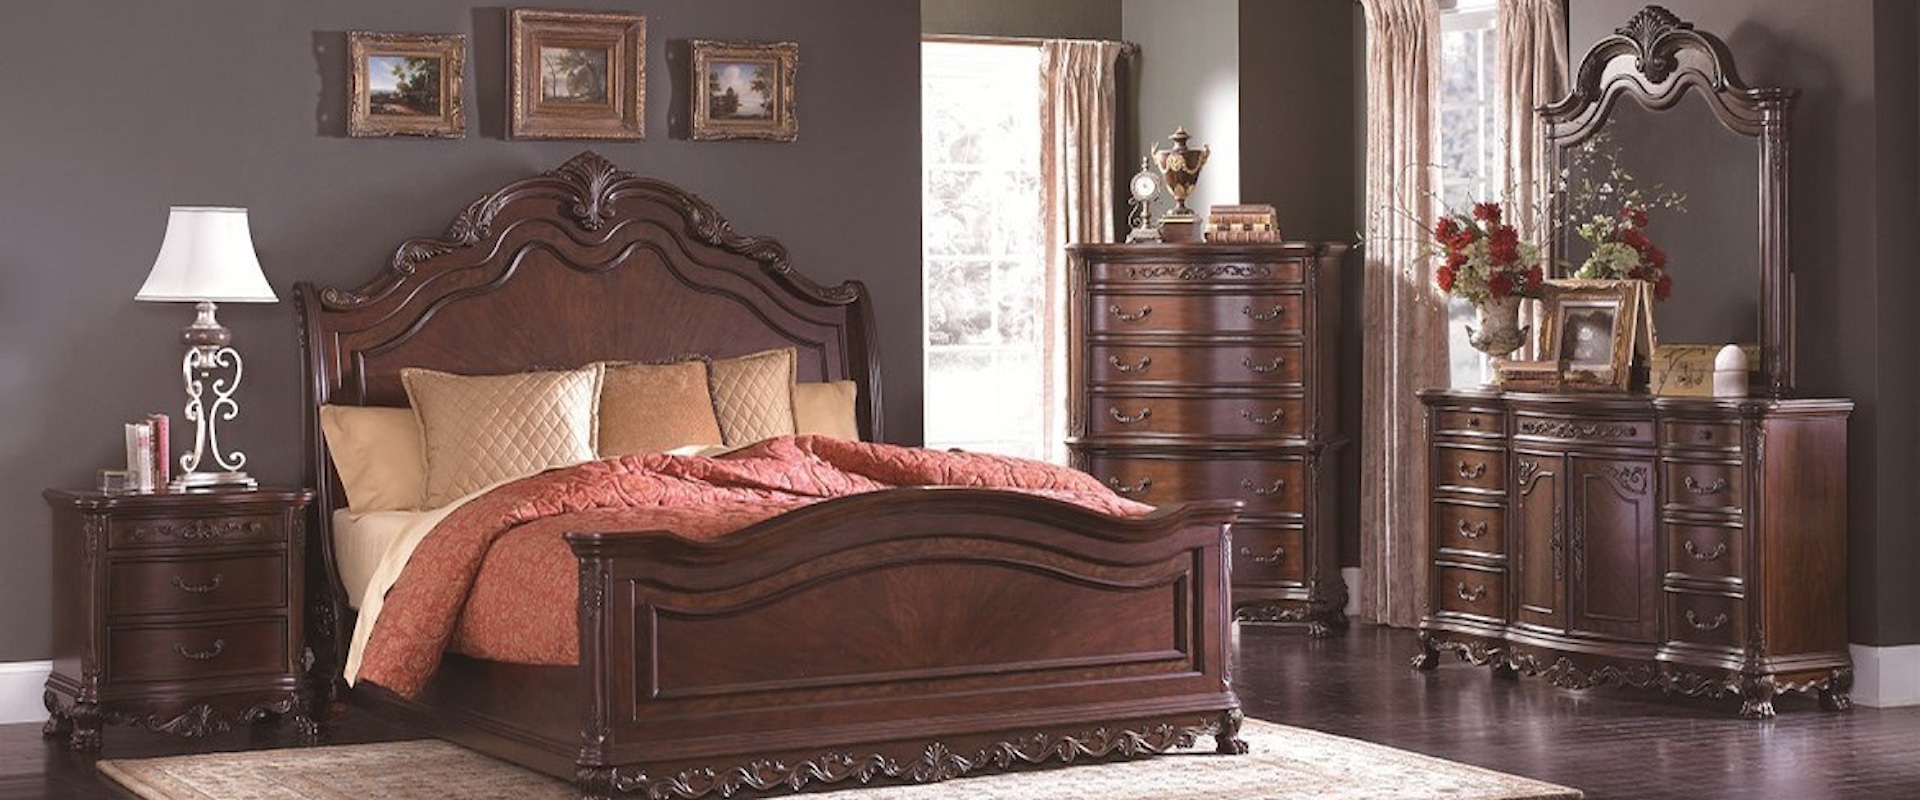 Traditional Queen Bedroom Group with Sleigh Bed